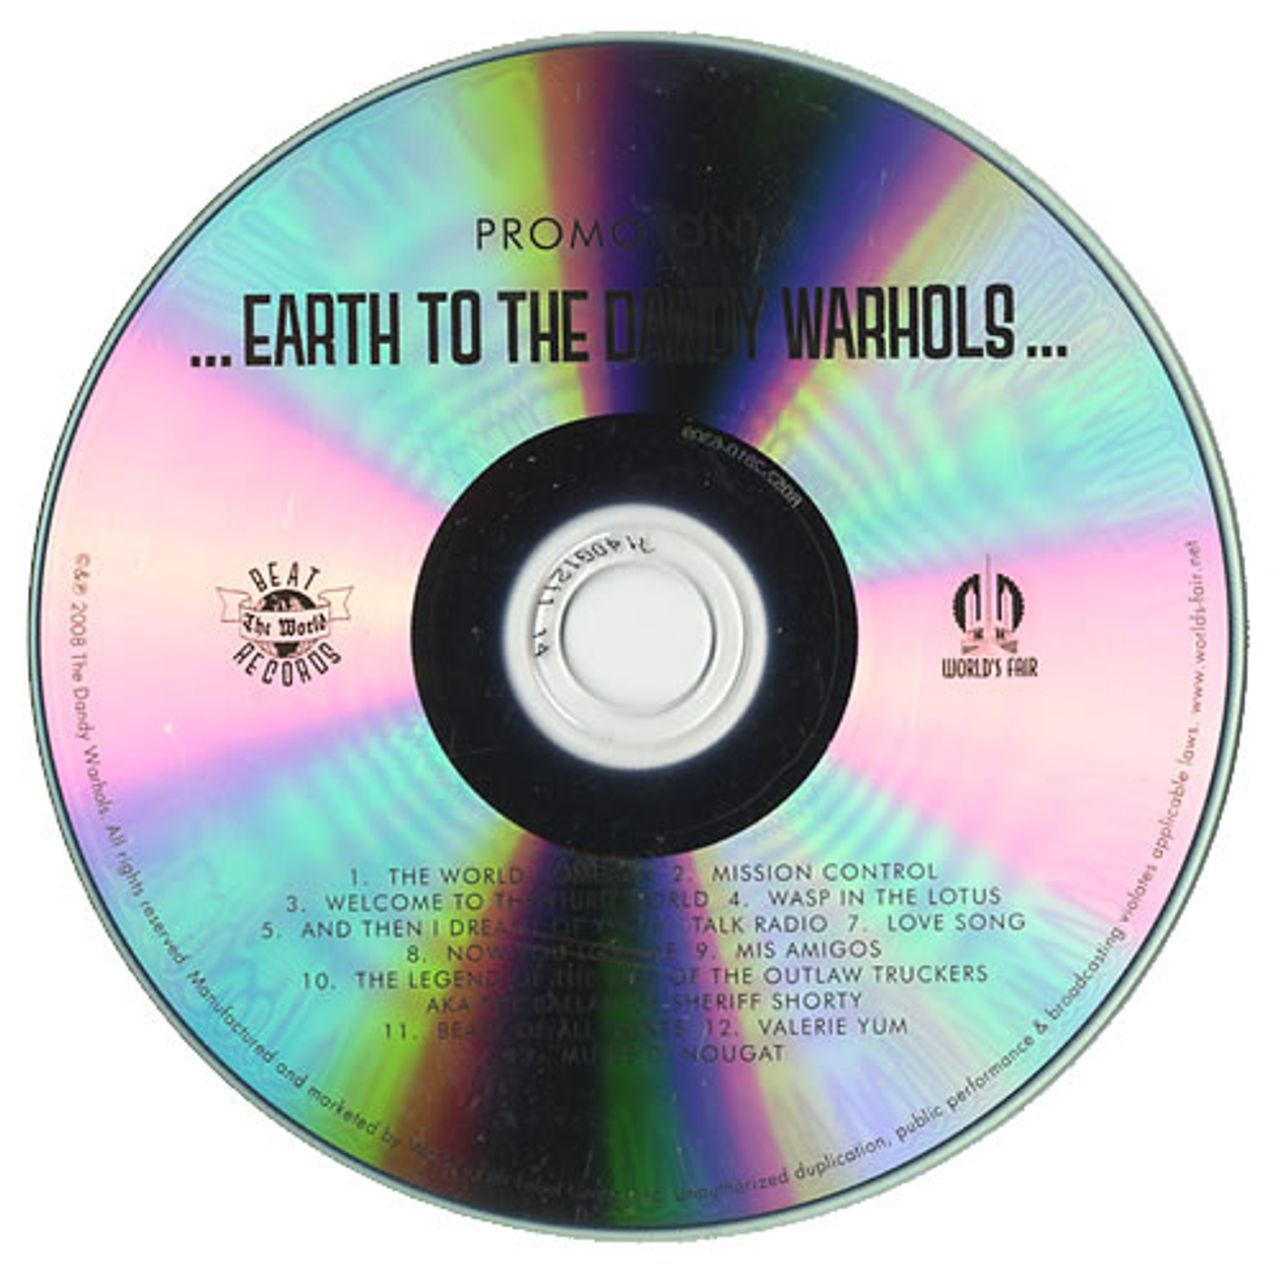 The Dandy Warhols Earth To The Dandy Warhols US Promo CD-R acetate CDR ACETATE